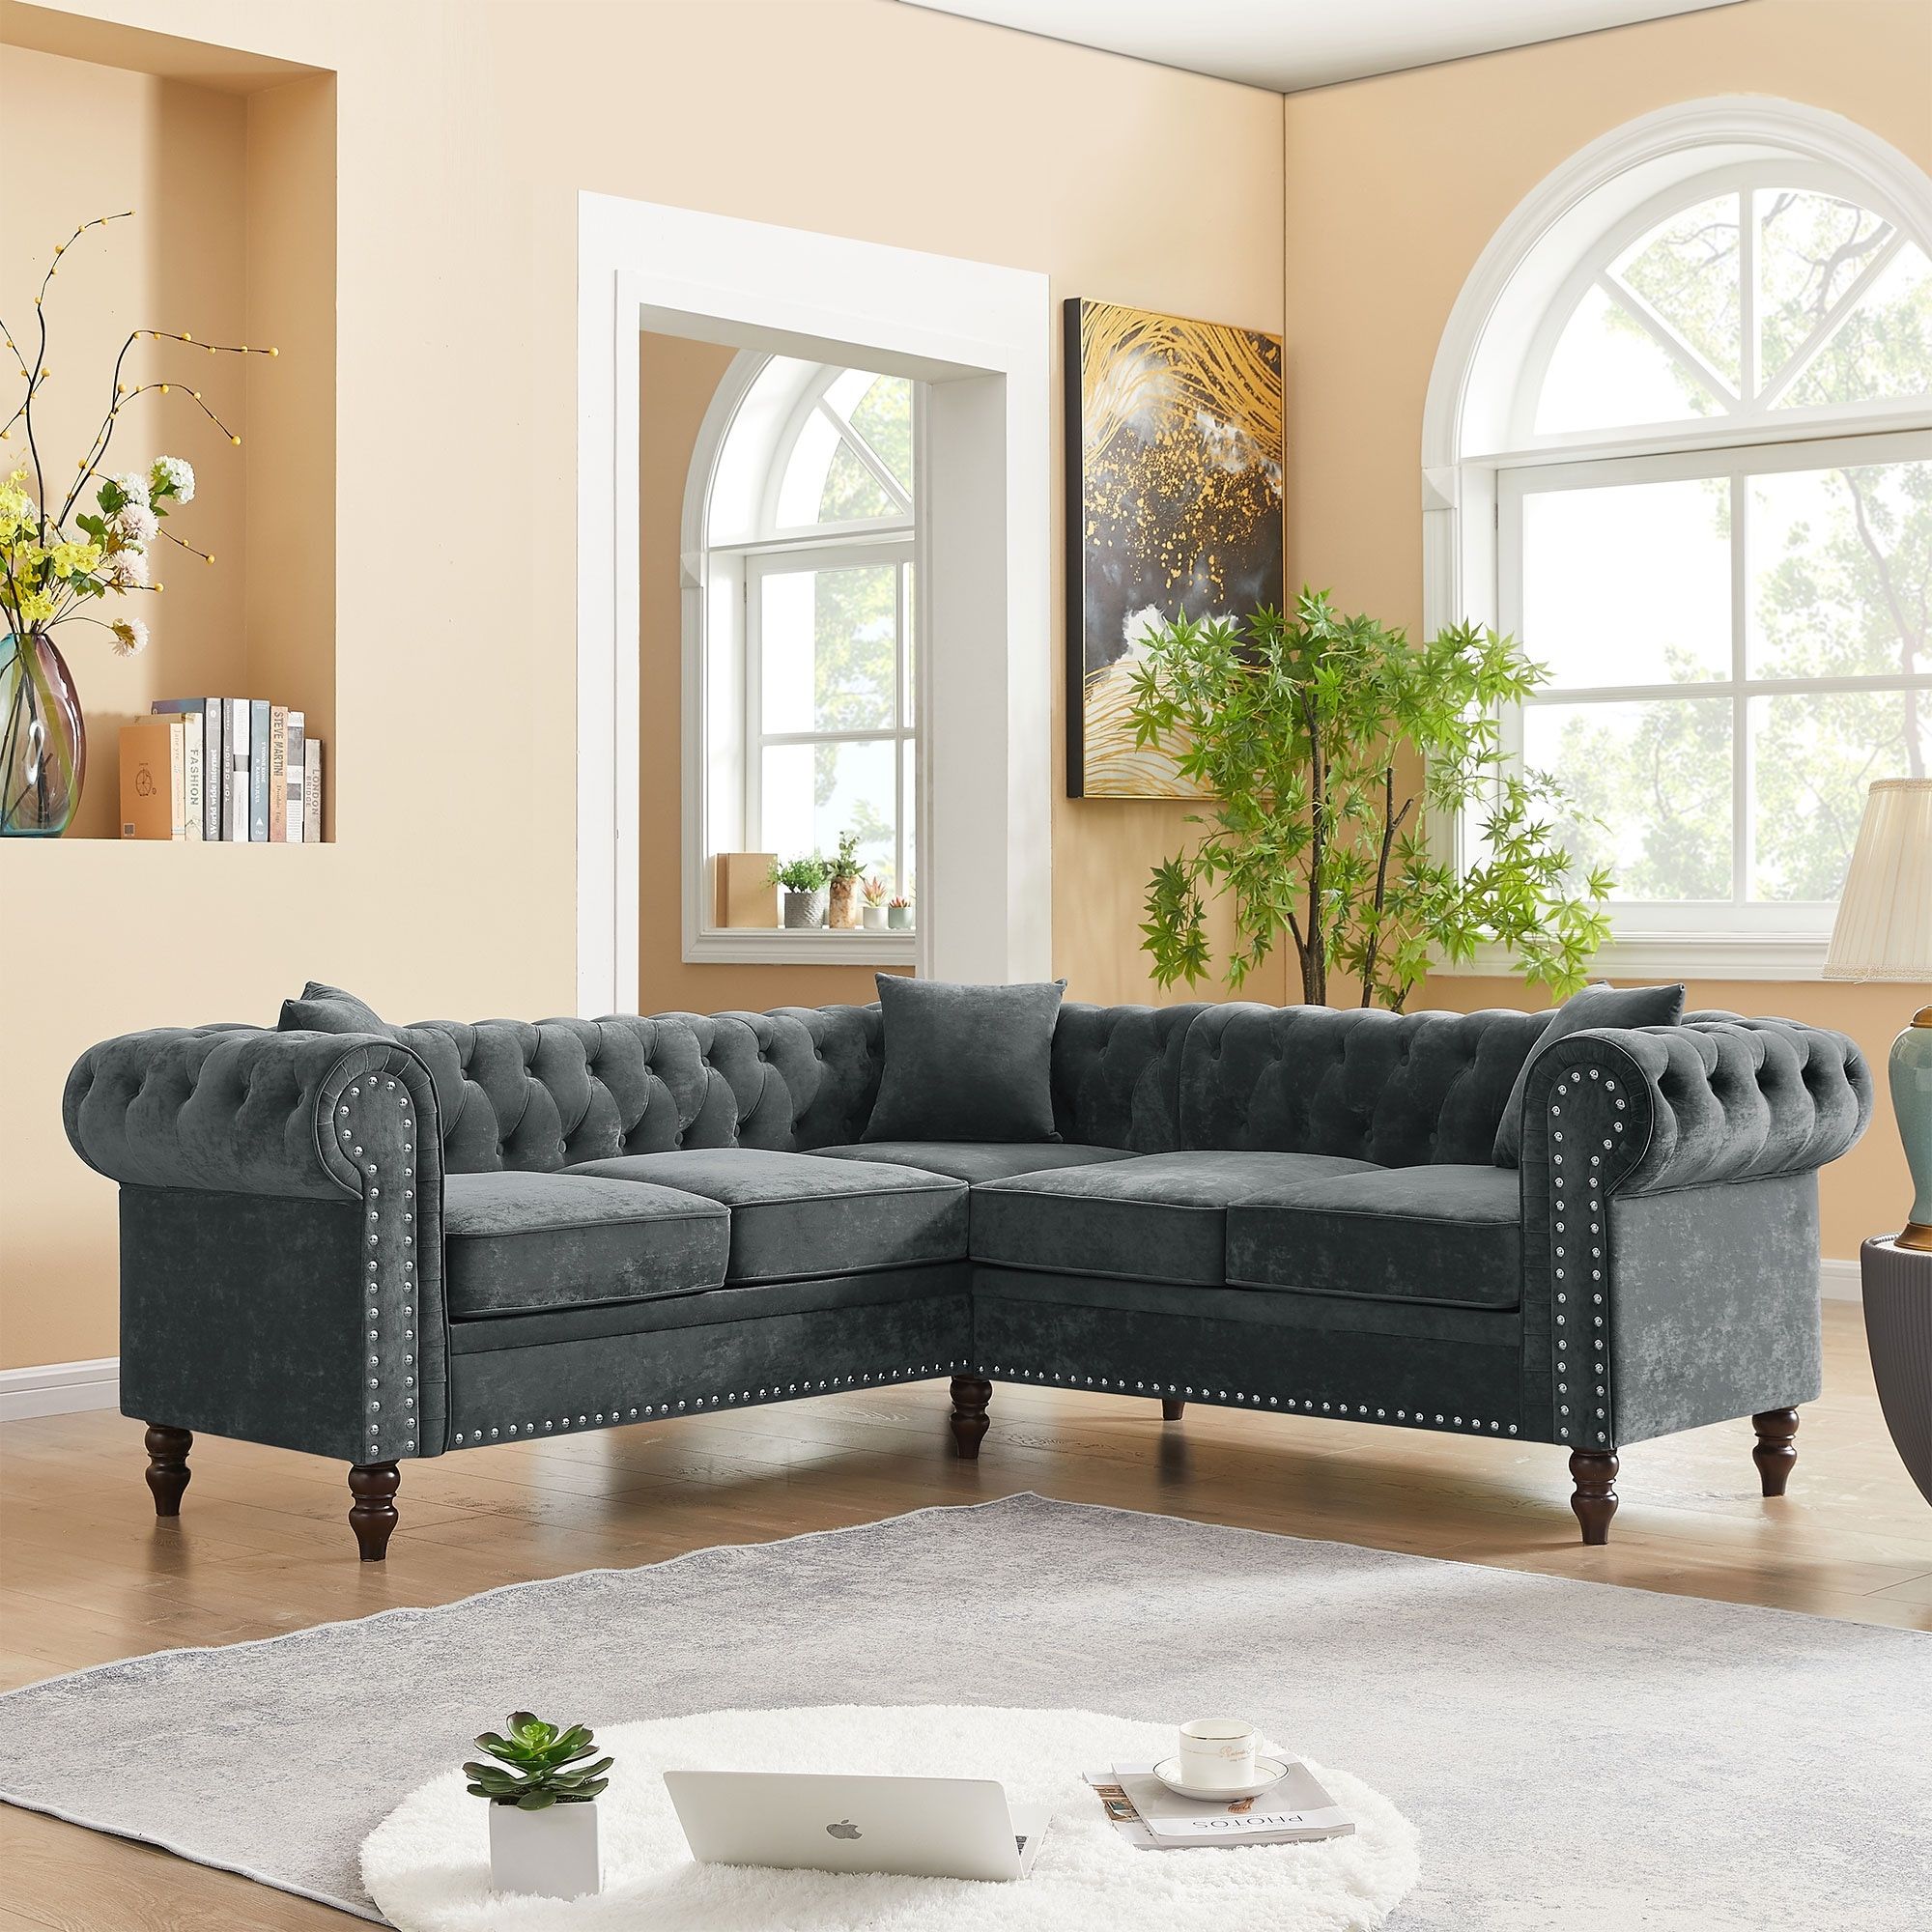 Sofa,L Shaped Sofaa,Deep Button Tufted Upholstered, Roll Arm Luxury Classic  Sofa, 3 Pillows Included – Bed Bath & Beyond – 38283618 Intended For Tufted Upholstered Sofas (View 7 of 15)